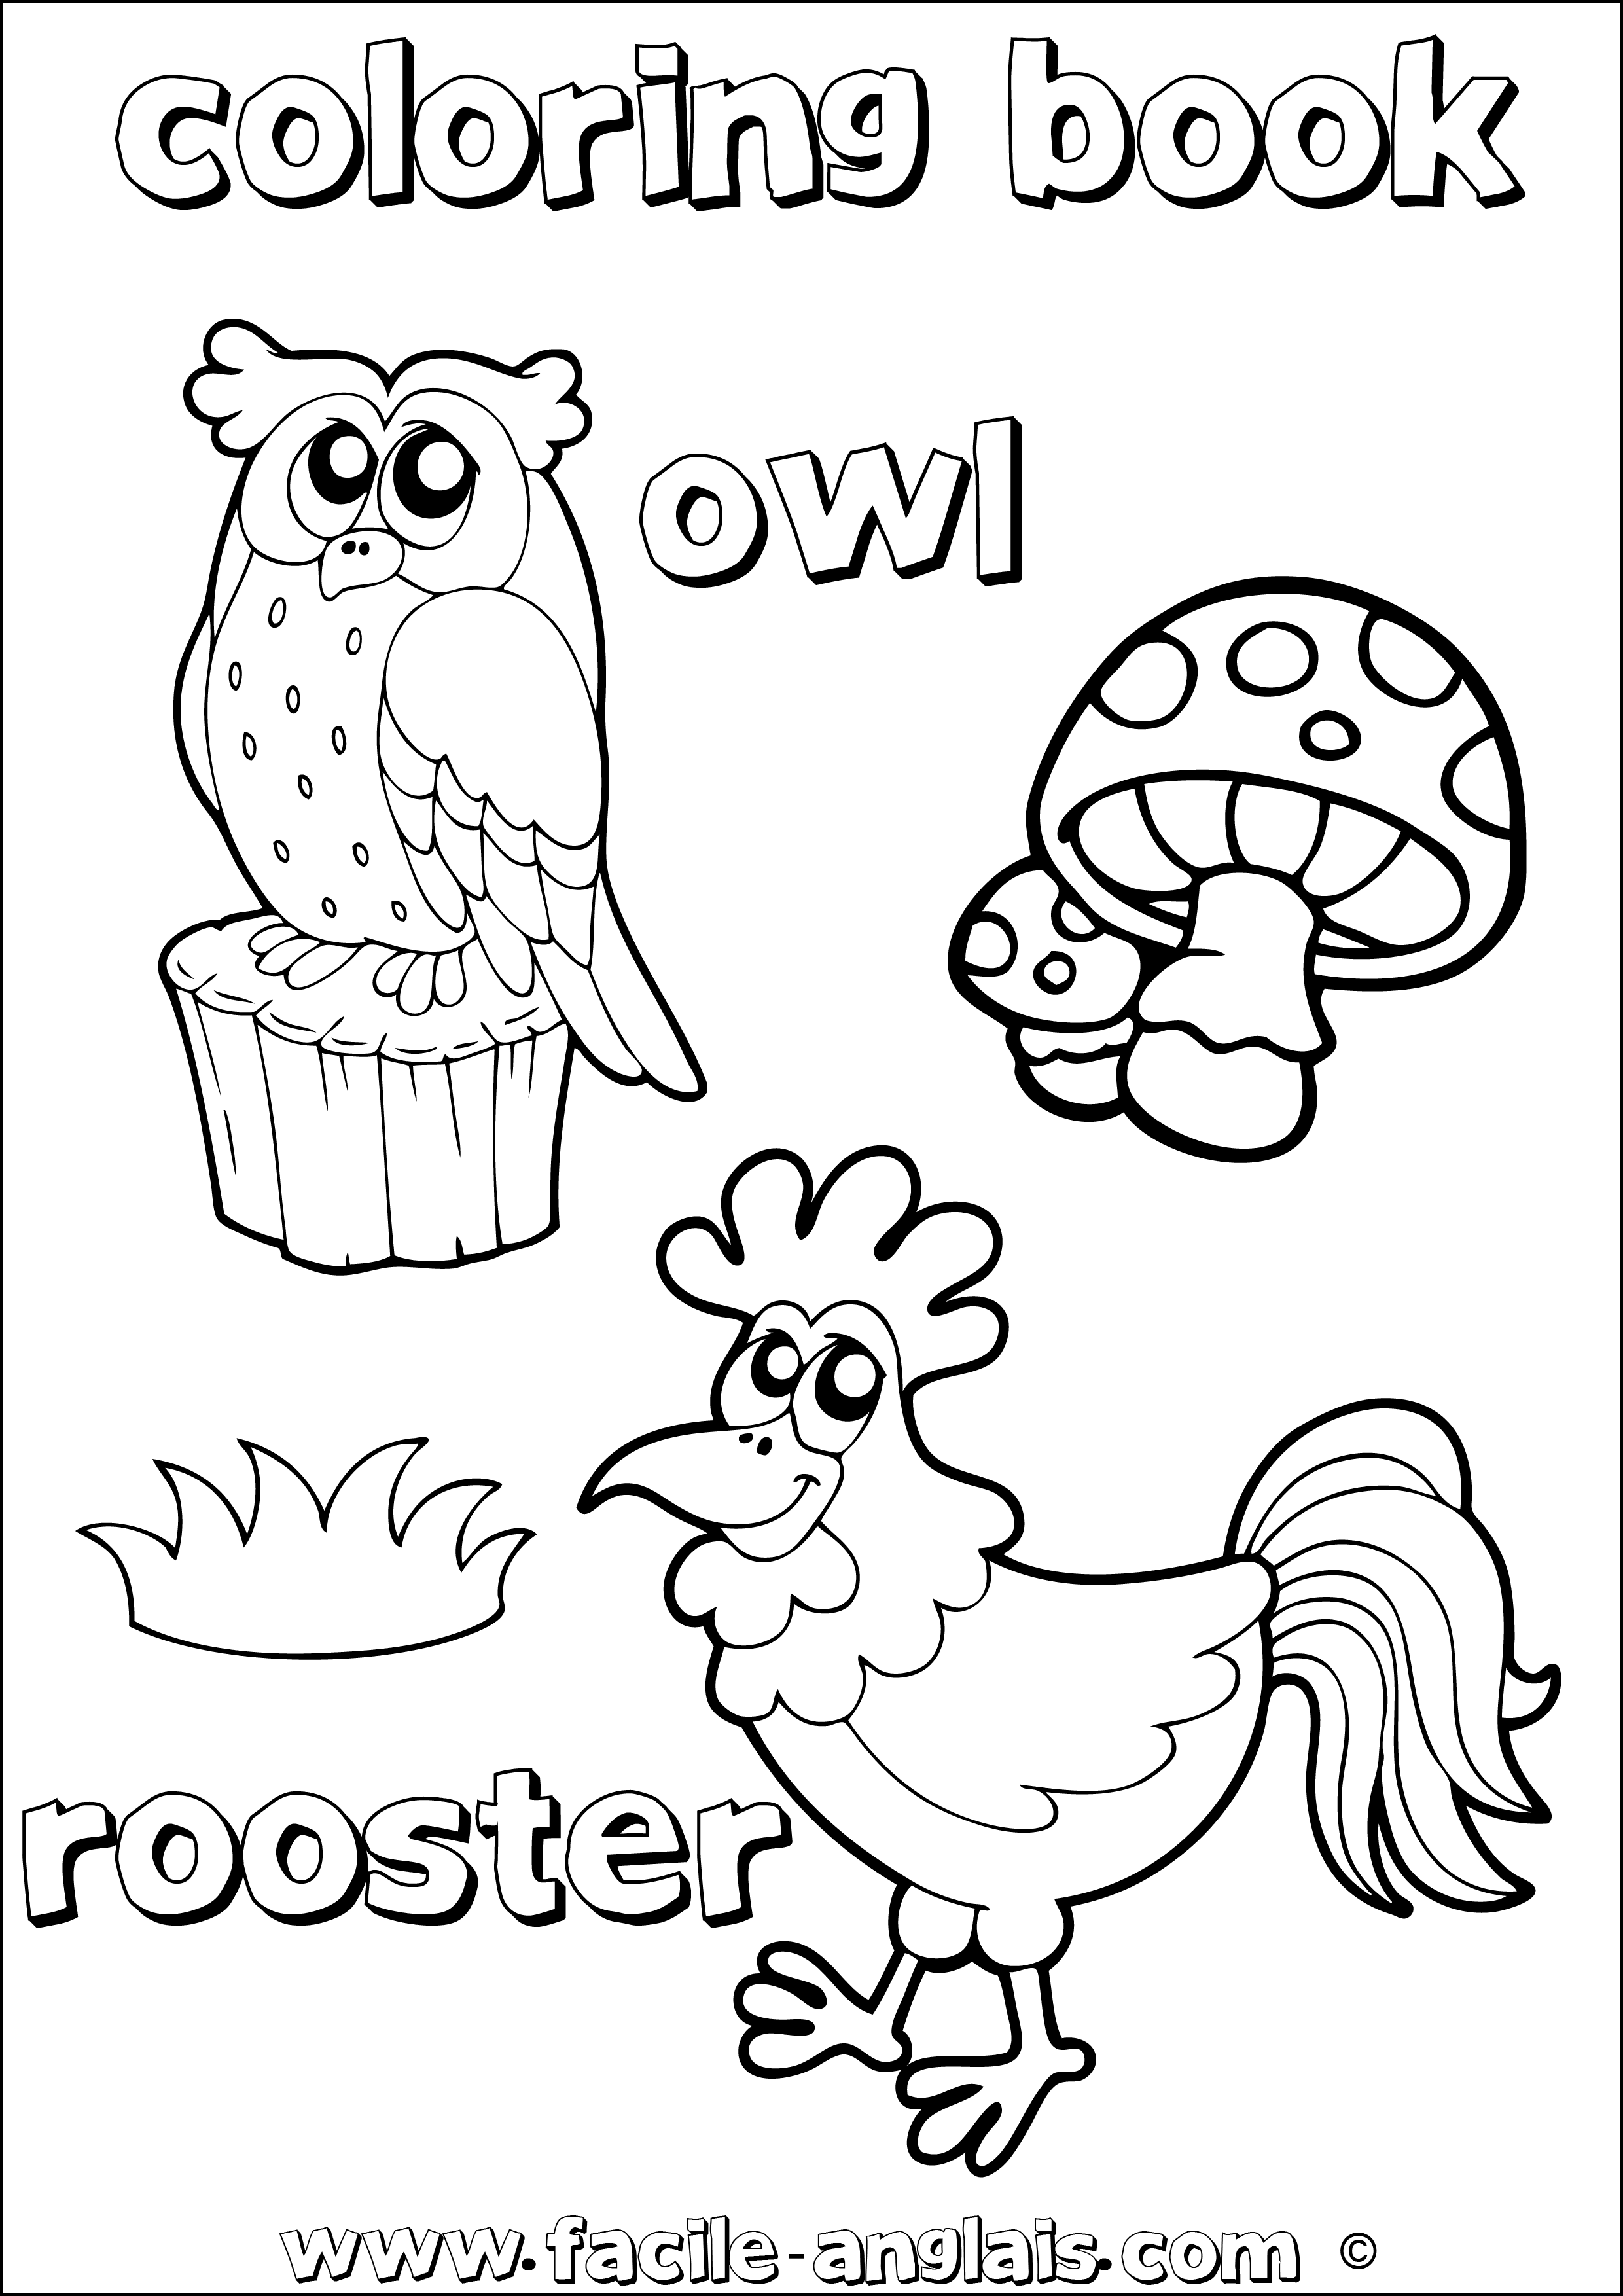 coloring book owl rooster